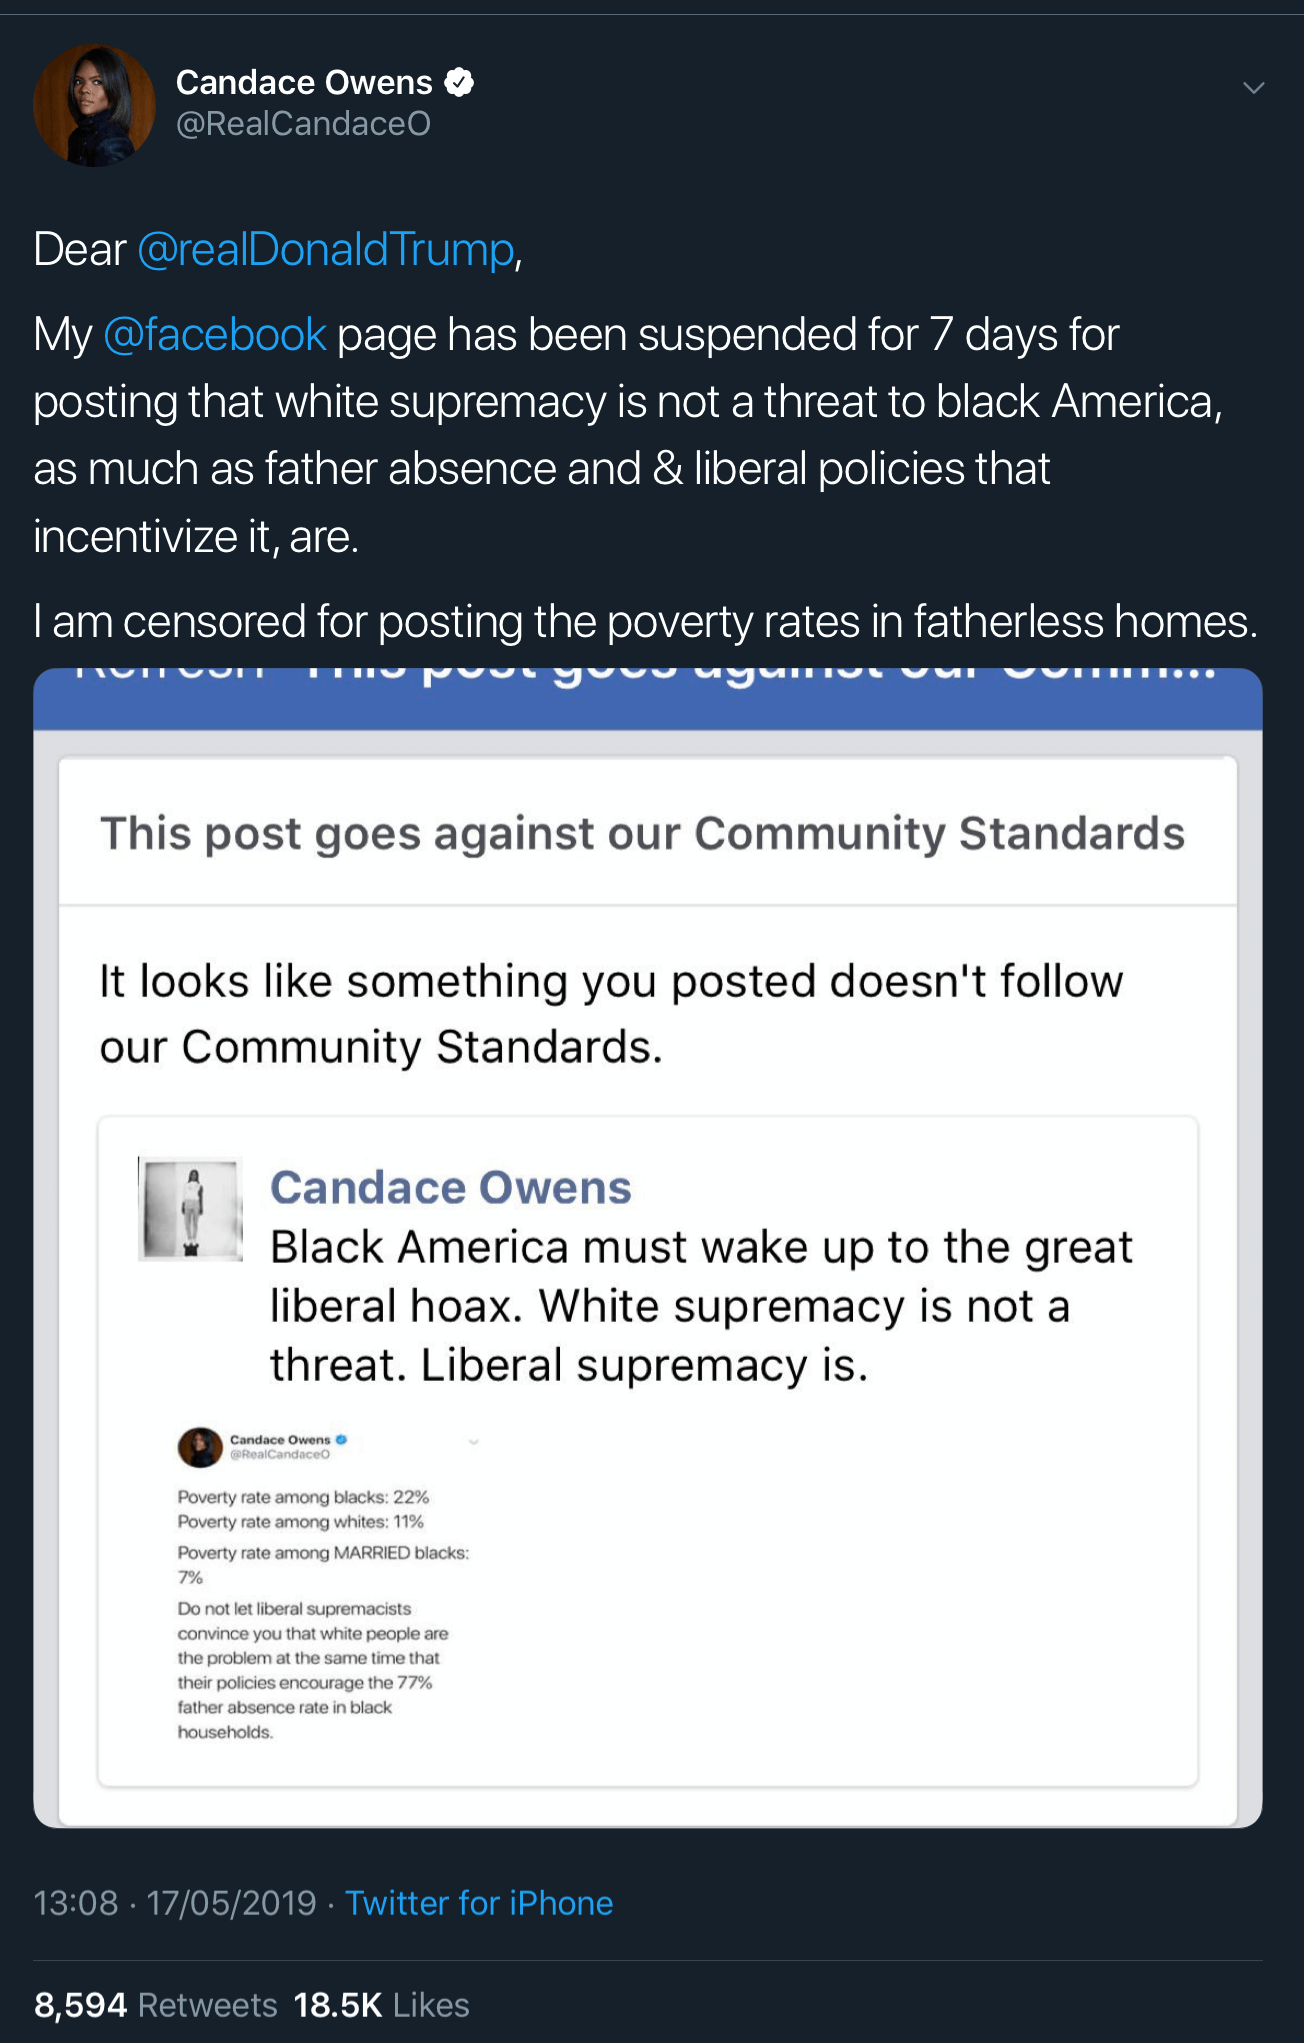 A message from Facebook saying that Candace Owens’ post violates its community standards.